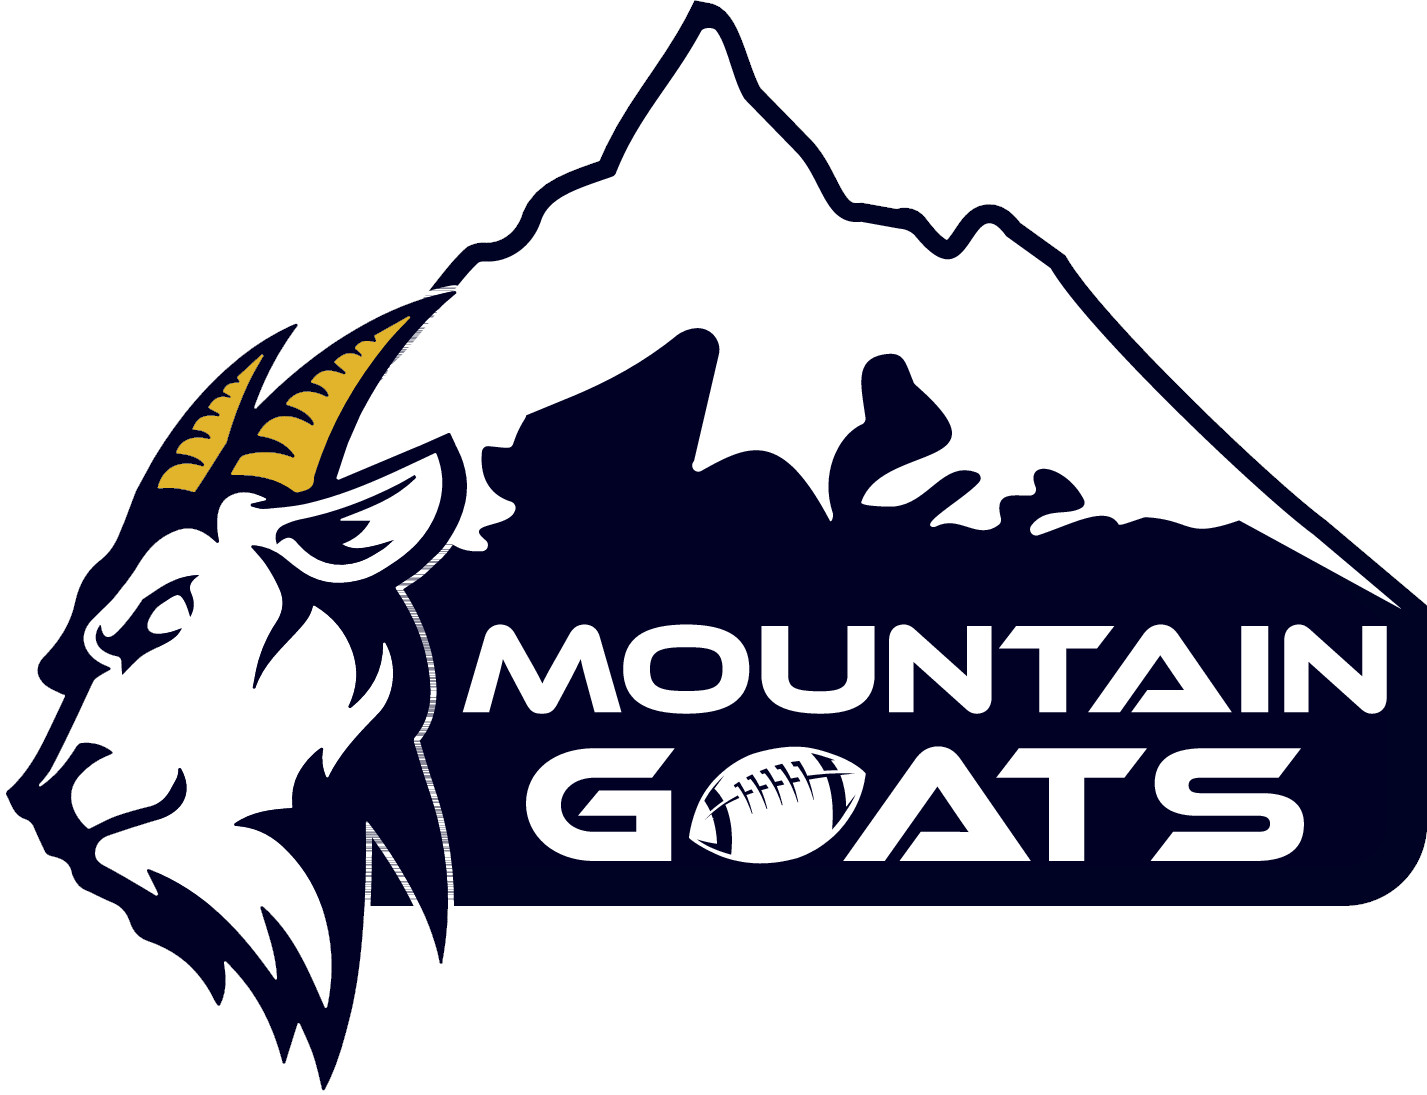 Home of the Goats